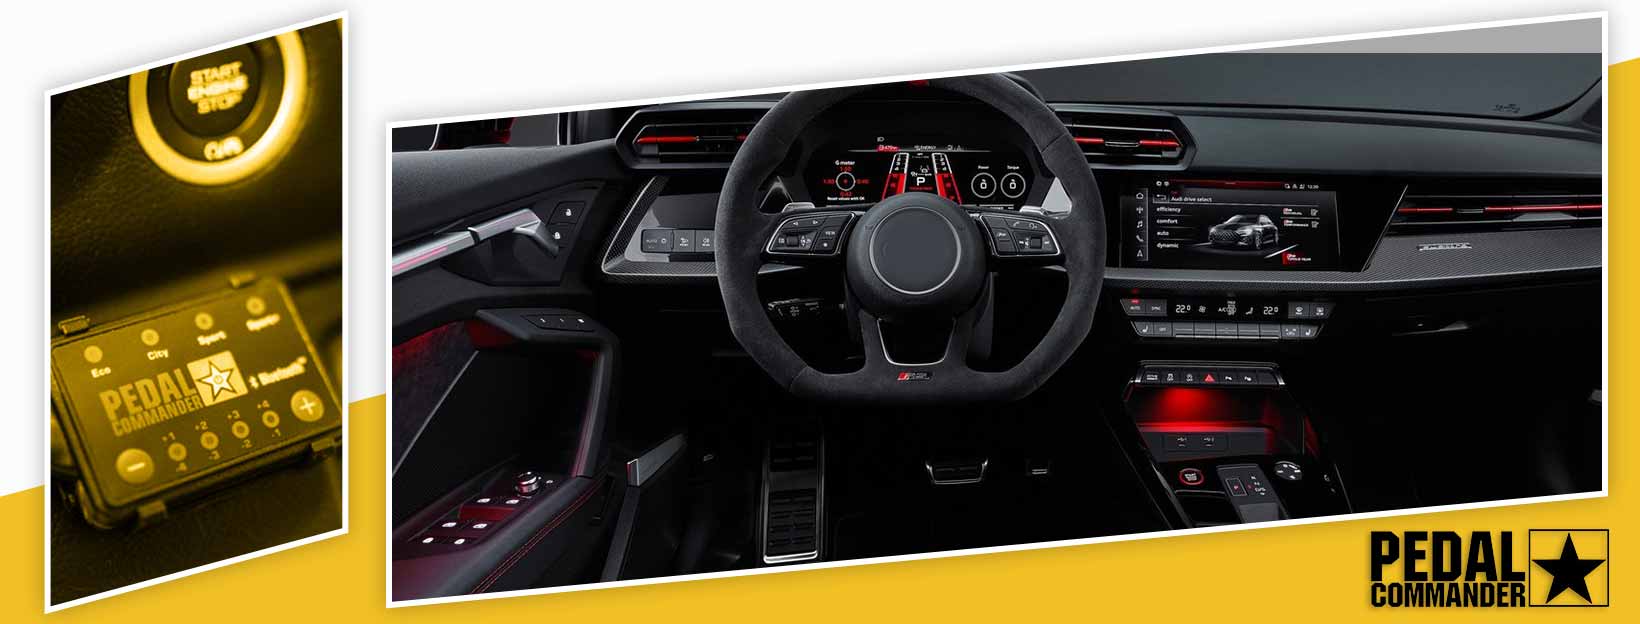 Pedal Commander for Audi RS3 - interior